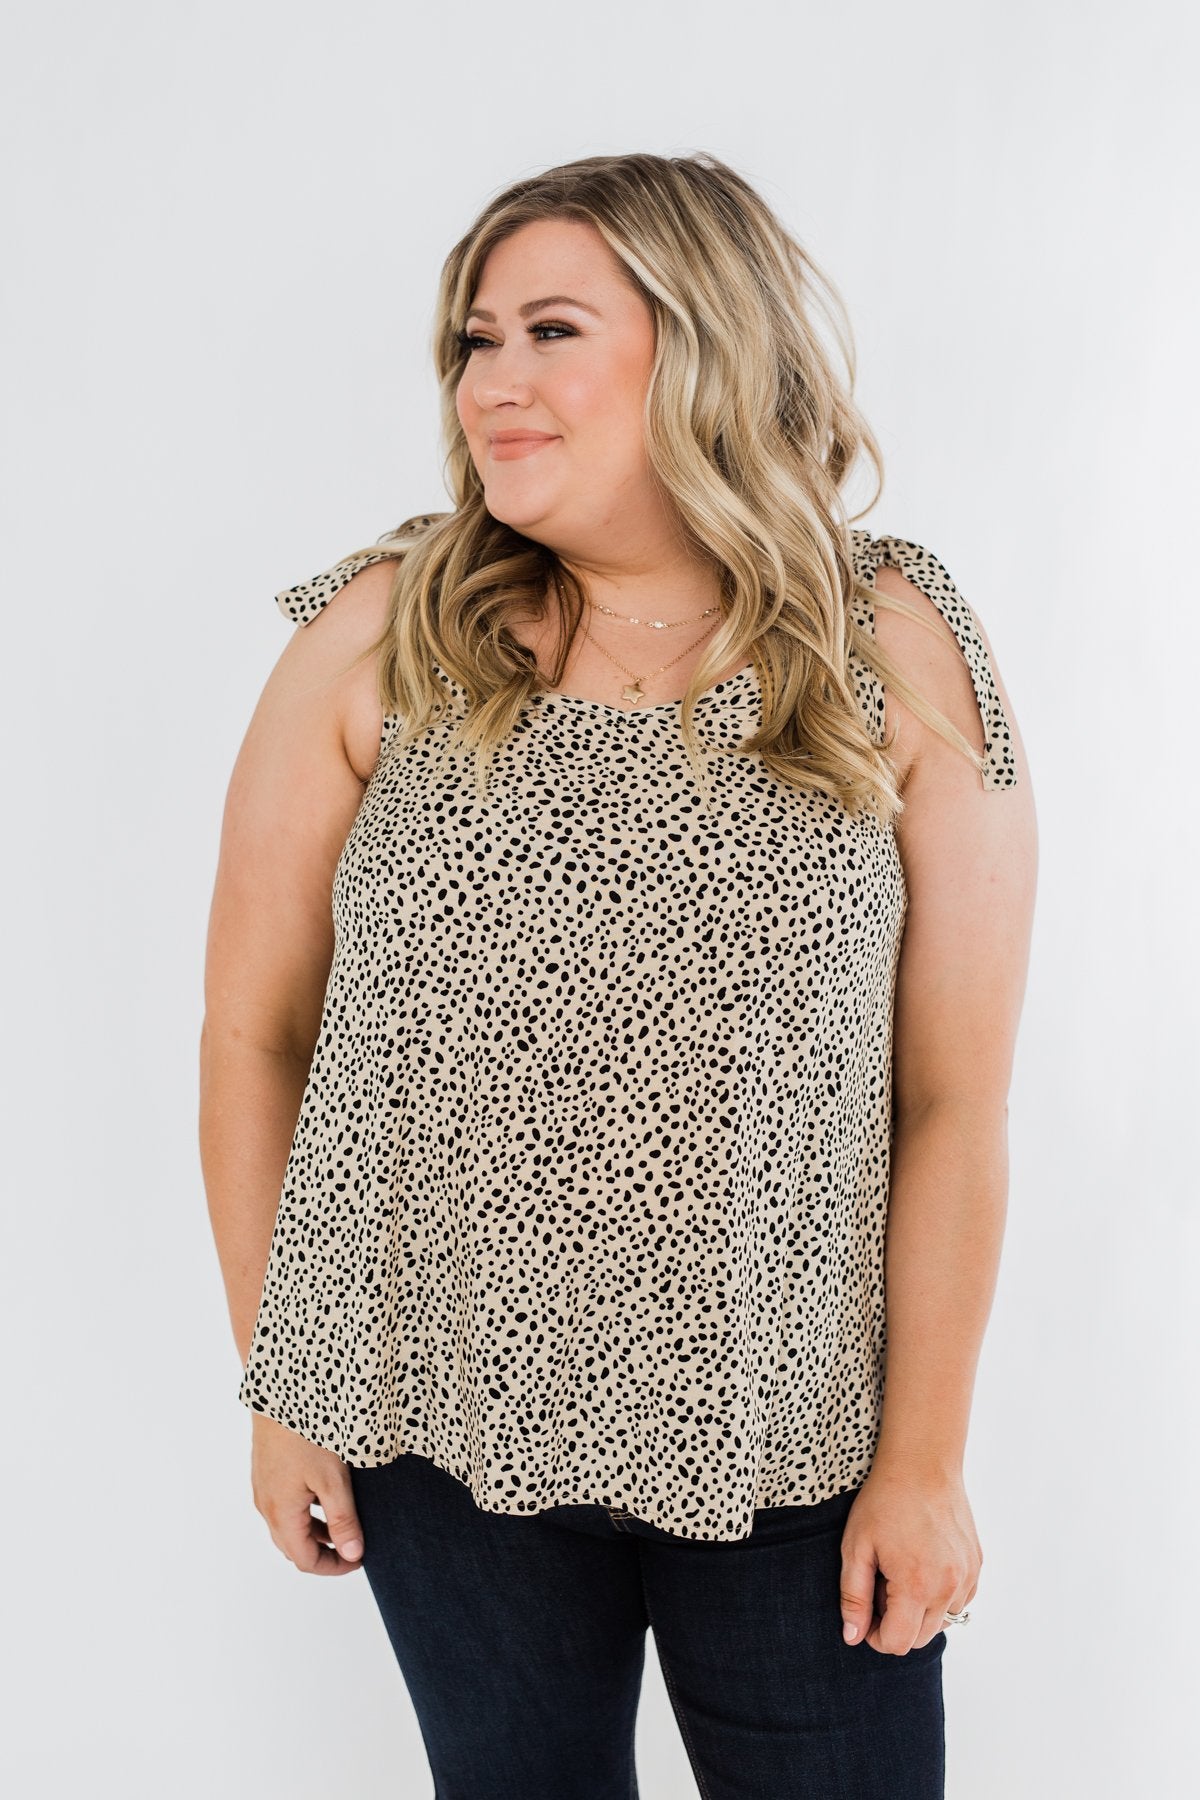 Call Of The Wild Speckled Tie Sleeve Blouse- Tan